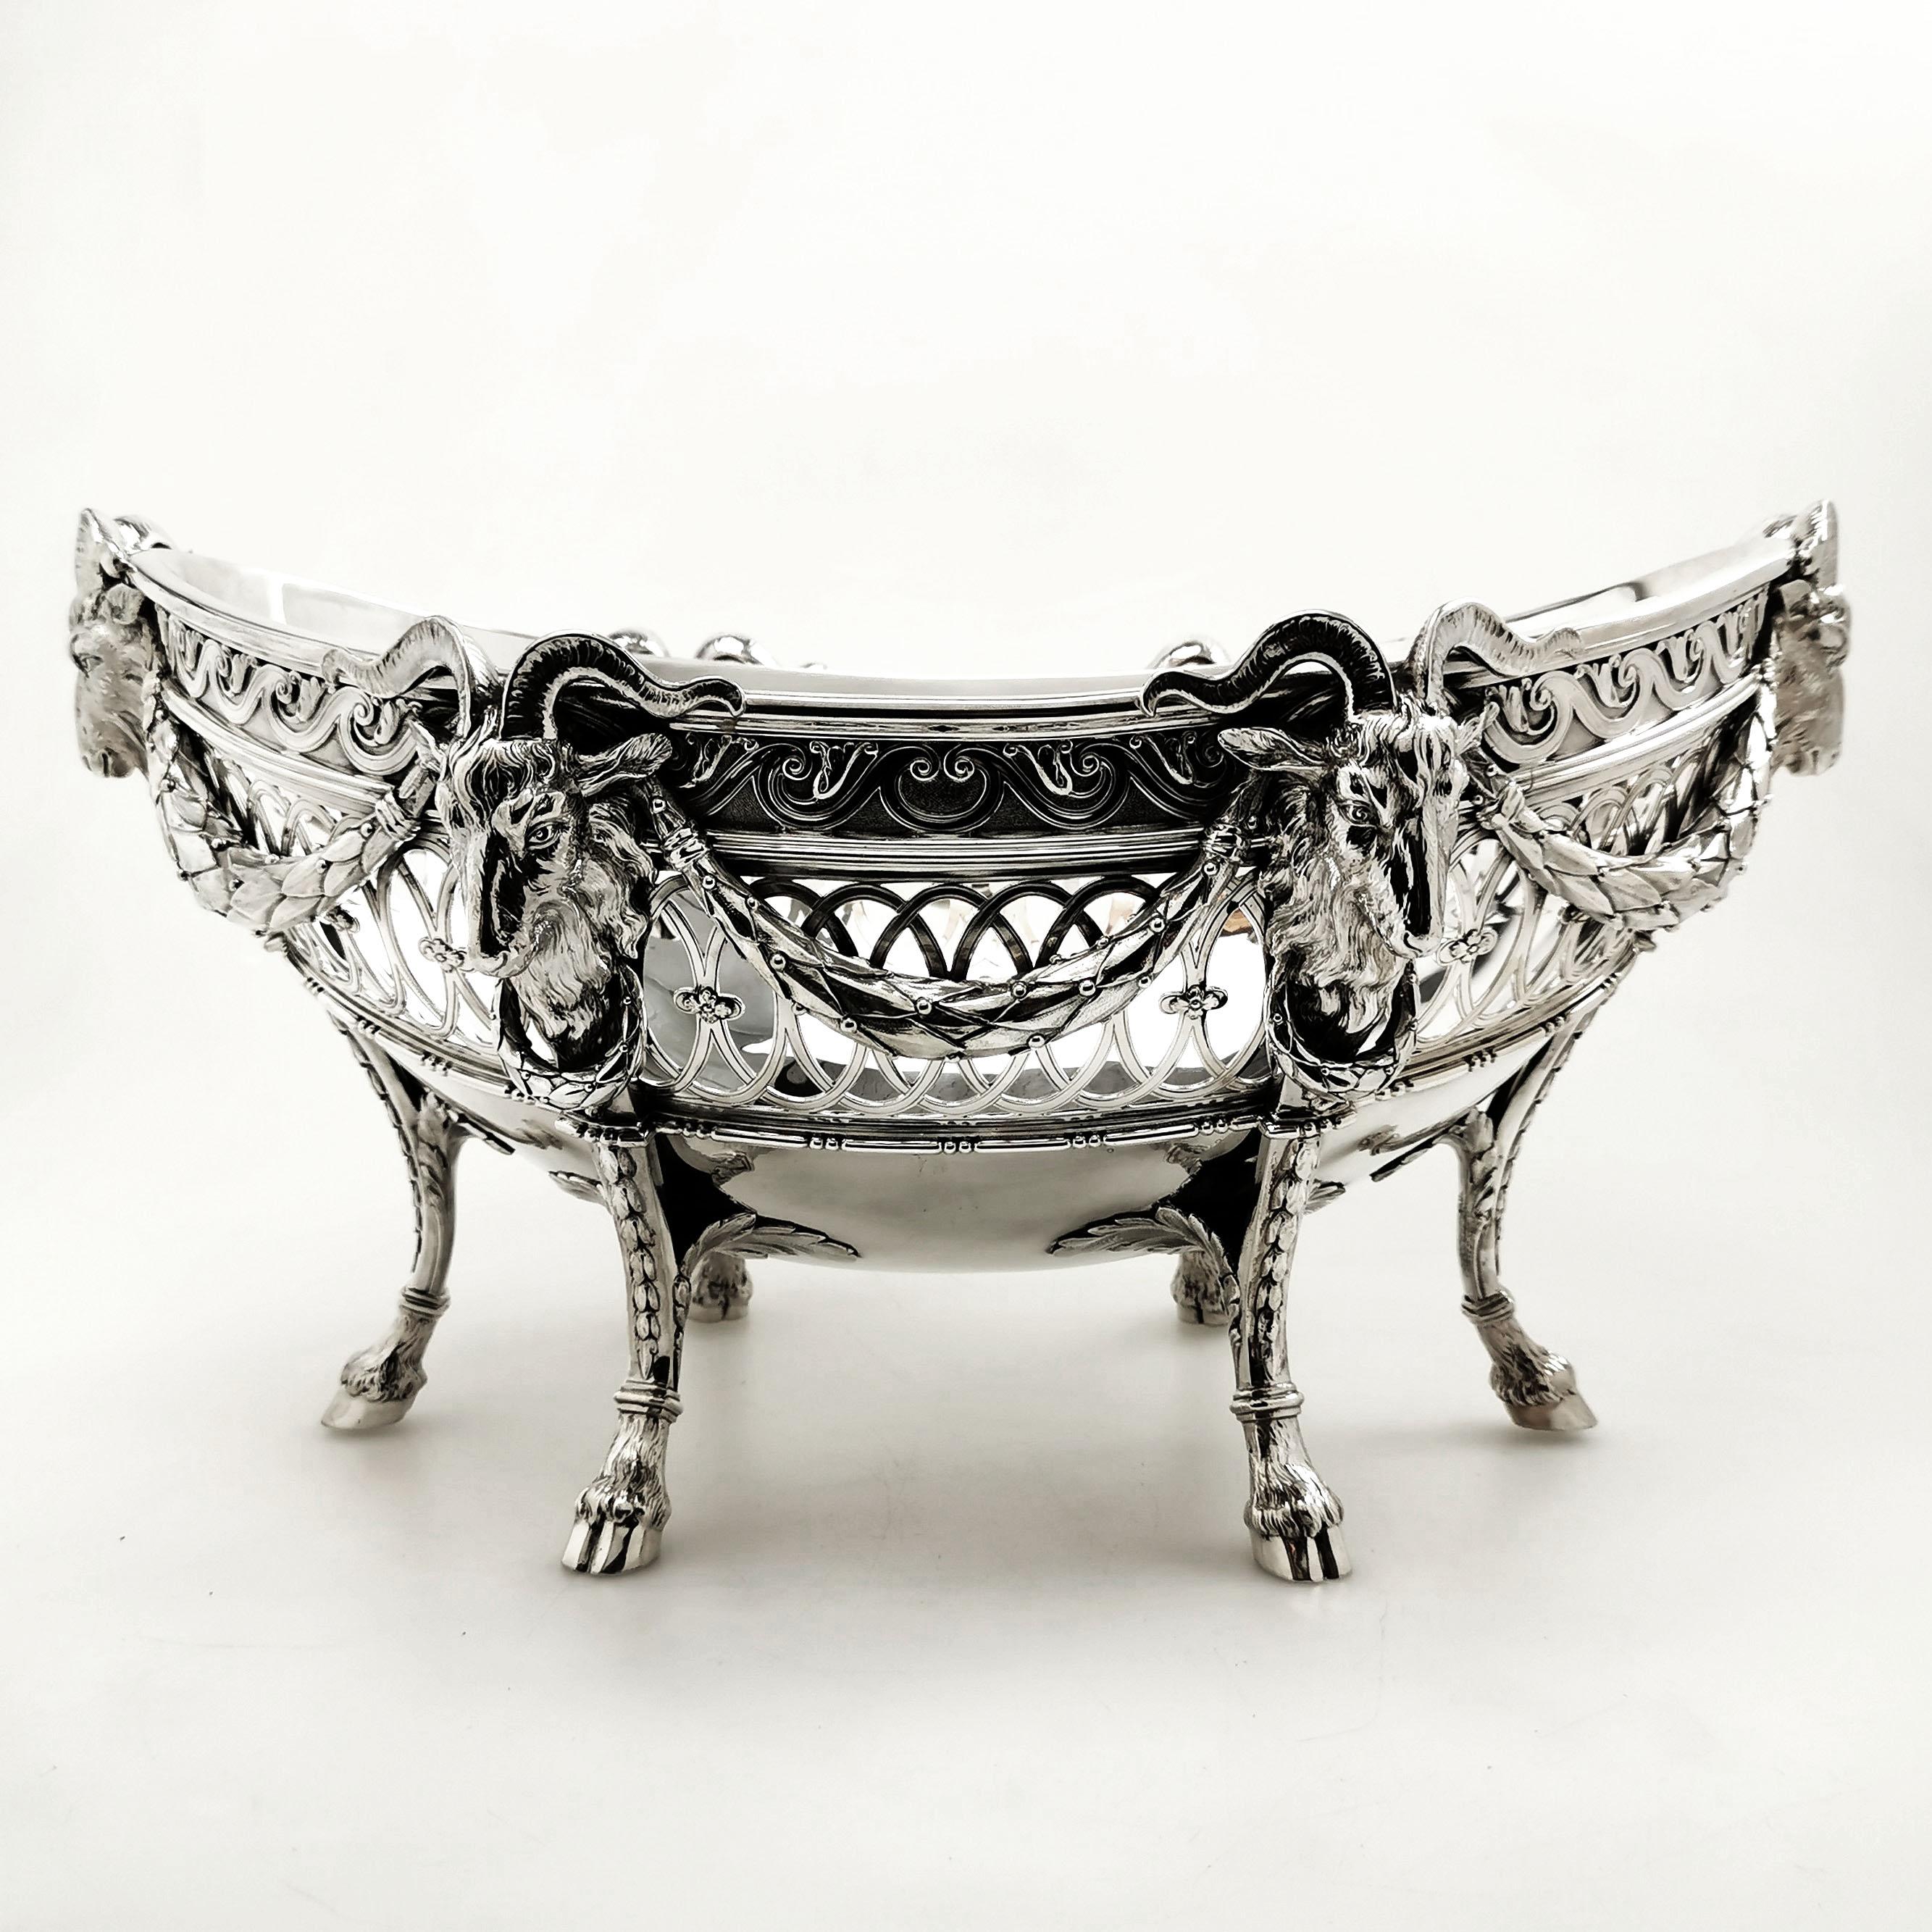 A magnificent exceptionally heavy Antique Silver Bowl, standing on six hoofed topped with impressive rams heads. This Oval Dish has a pierced pattern around the sides. This Bowl is of substantial size, but of notably heavy weight.

Made in London in